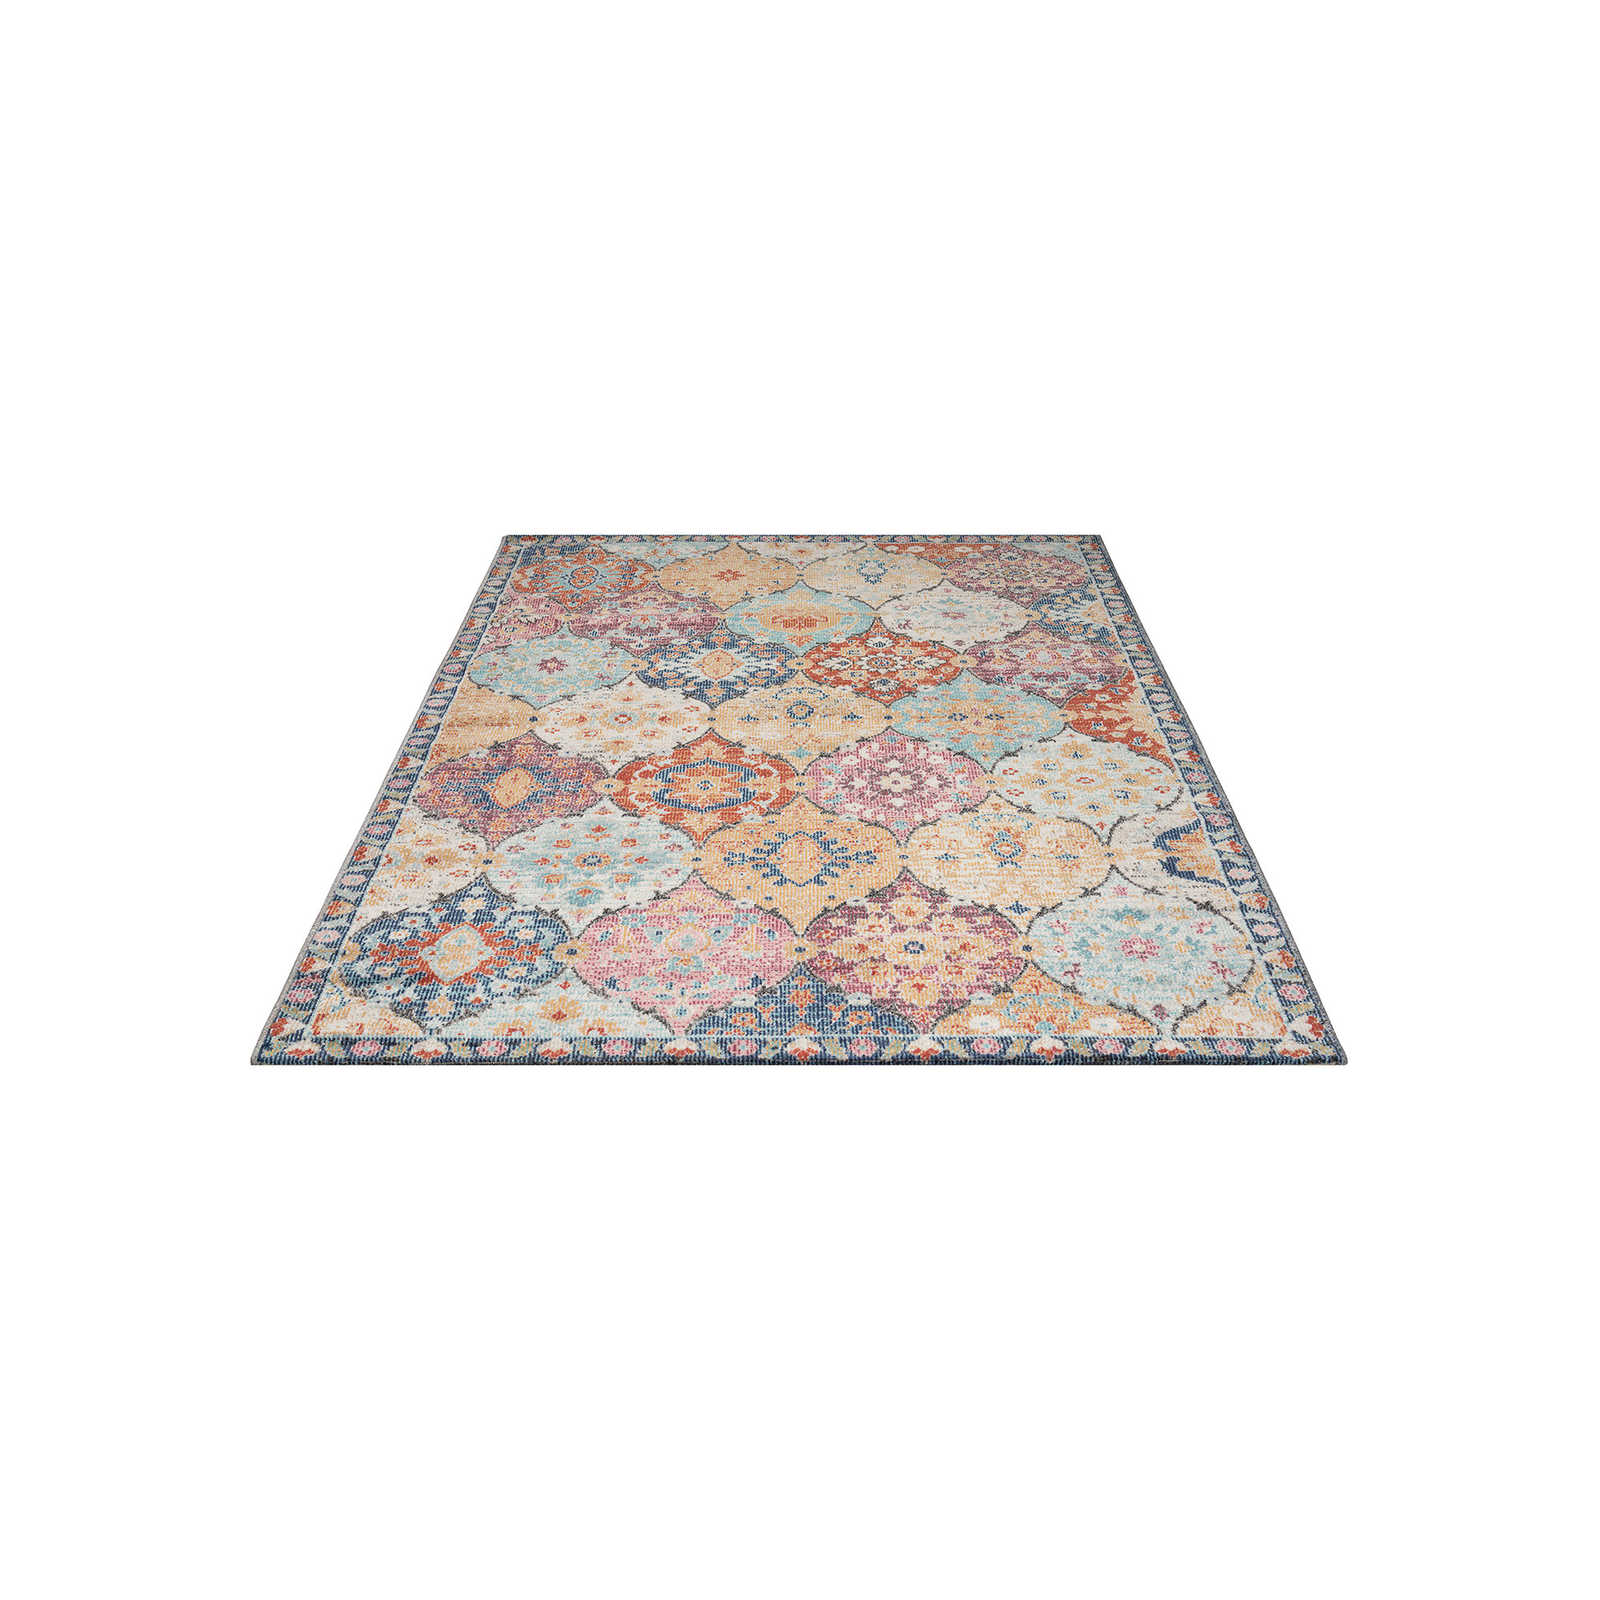 Colourful Flatweave Outdoor Rug - 230 x 160 cm
